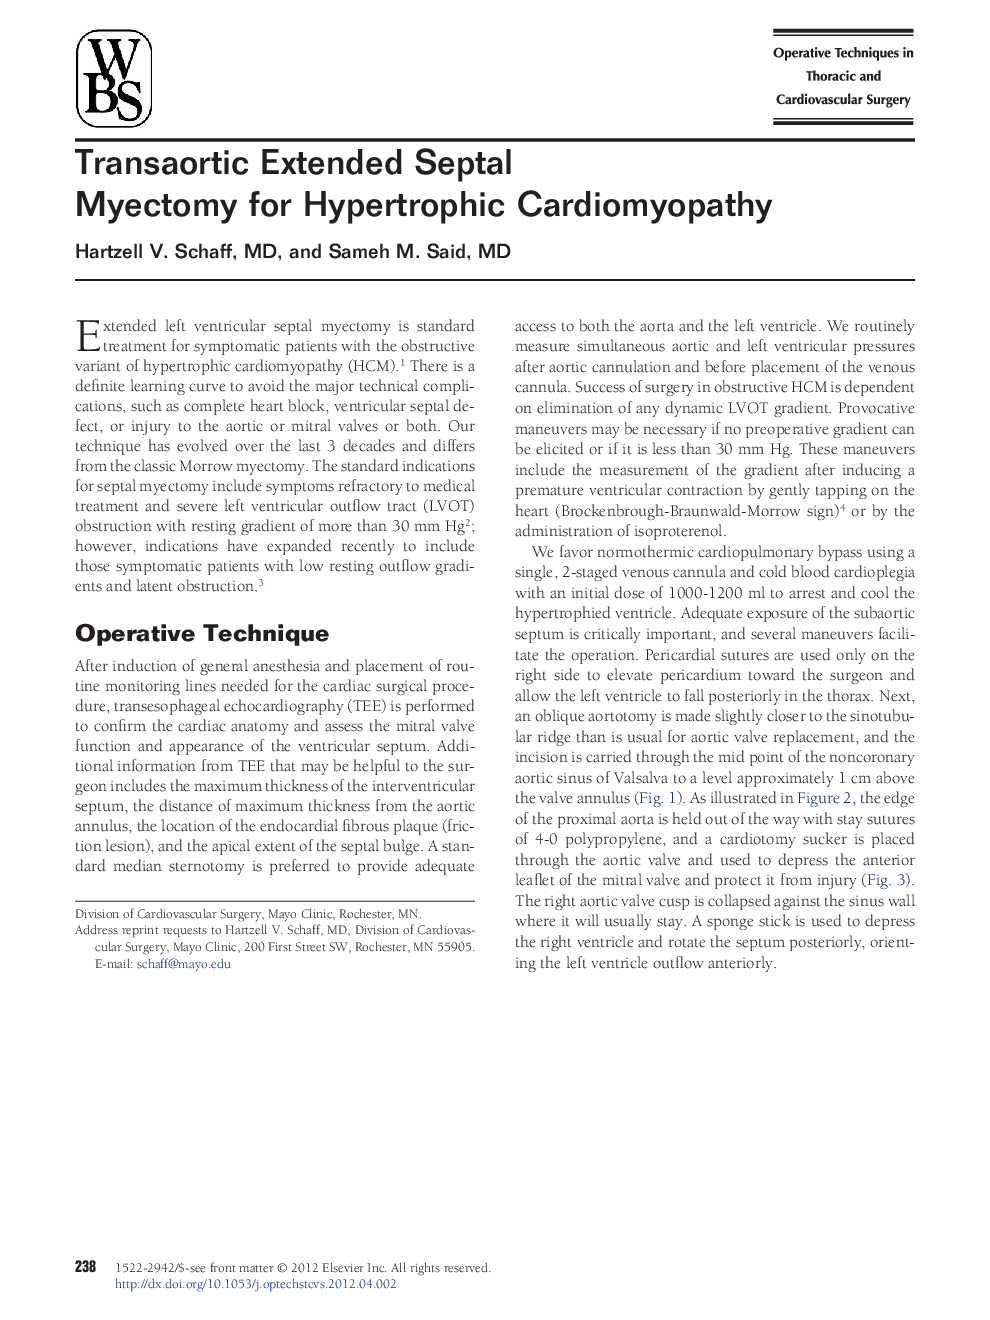 Transaortic Extended Septal Myectomy for Hypertrophic Cardiomyopathy